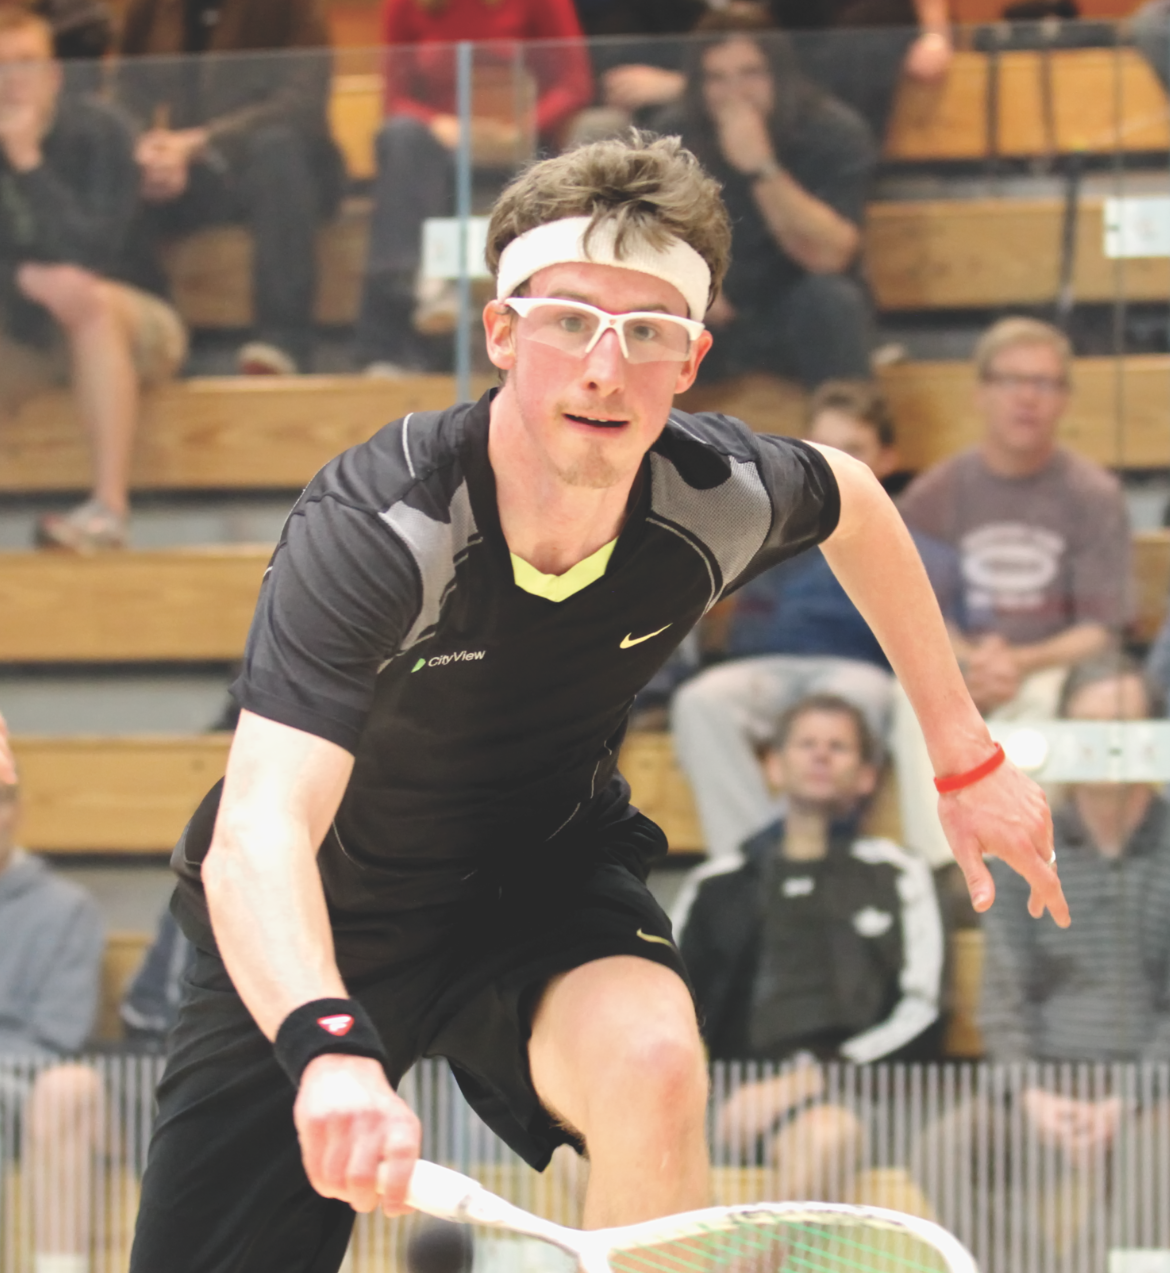 In his second trip to the finals of the Men’s S. L. Green Championship, Chris Gordon took the opening game from Julian Illingworth before falling in four. 